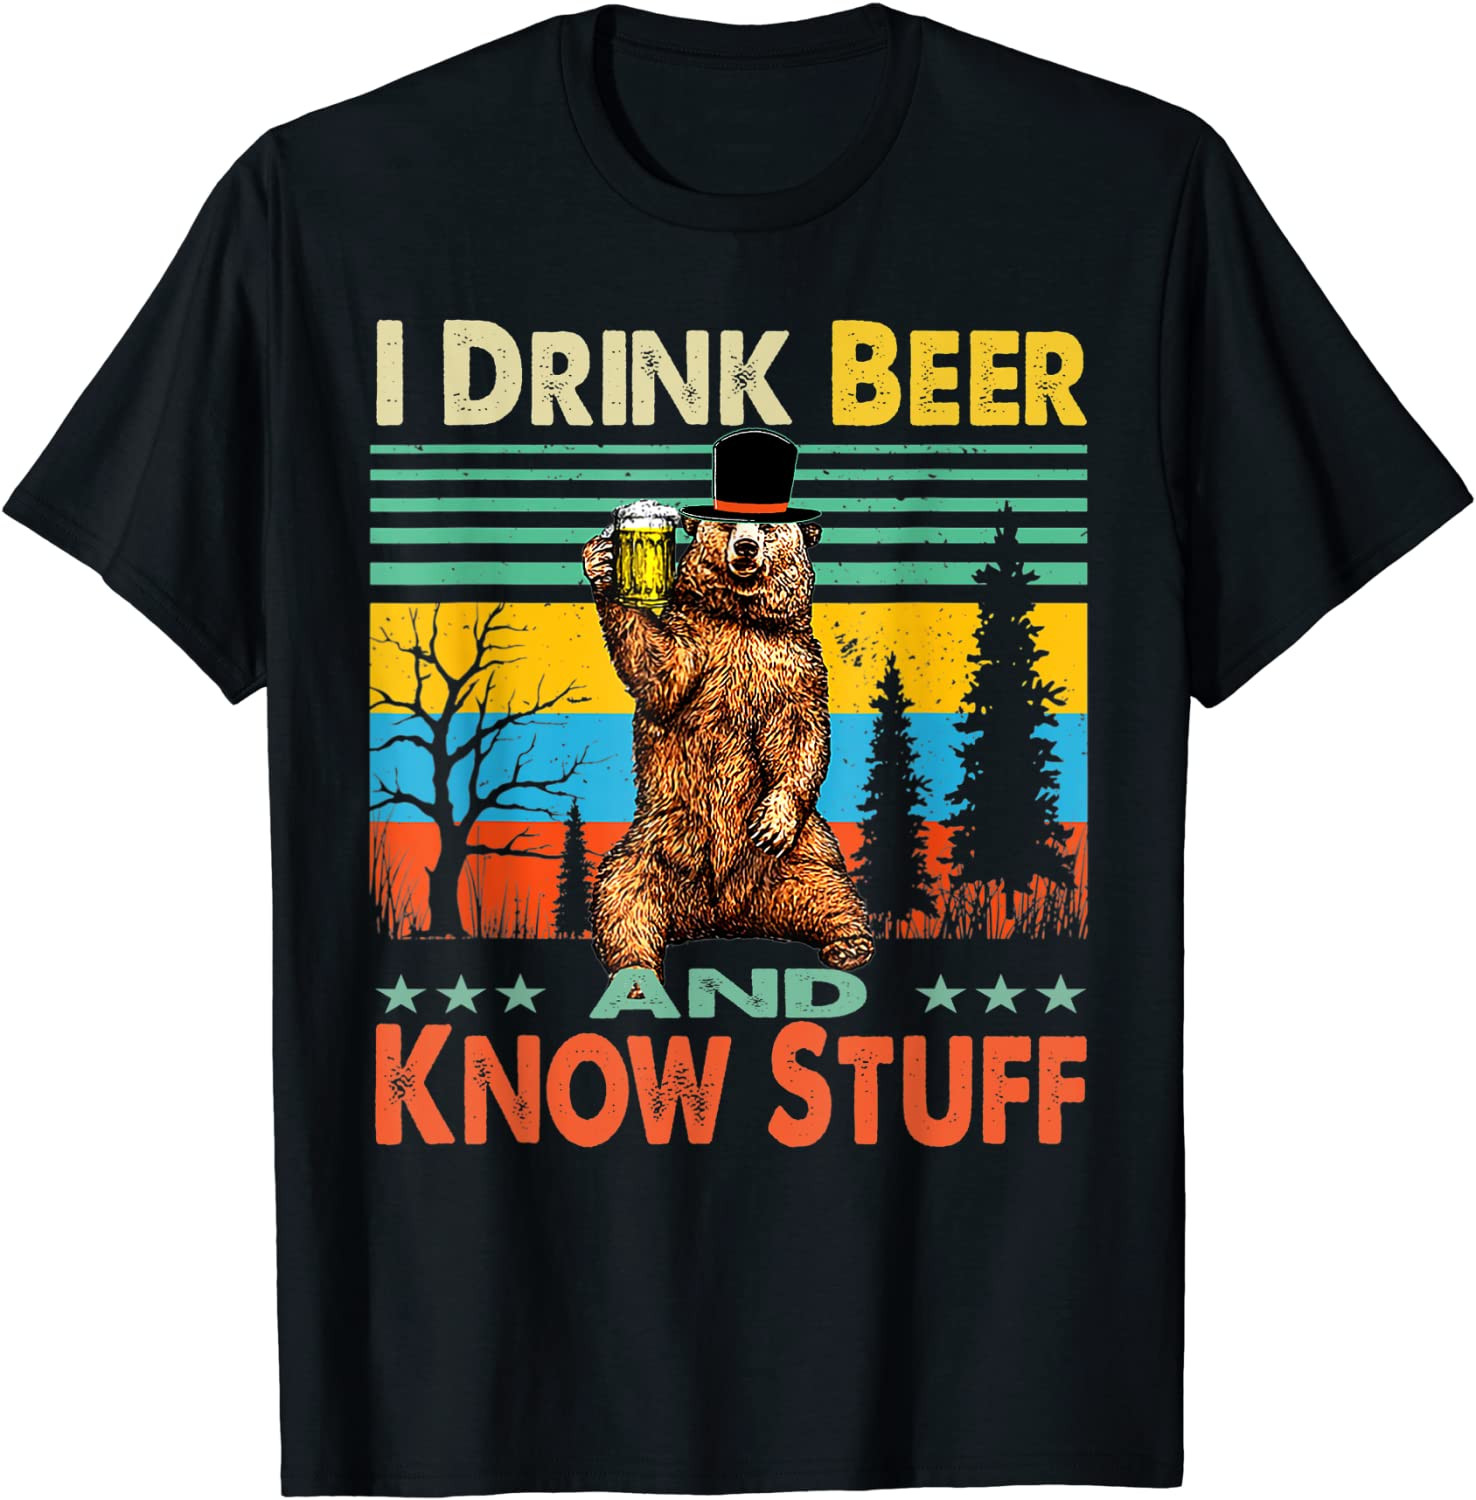 I Drink Beer And Know Stuff T-Shirt